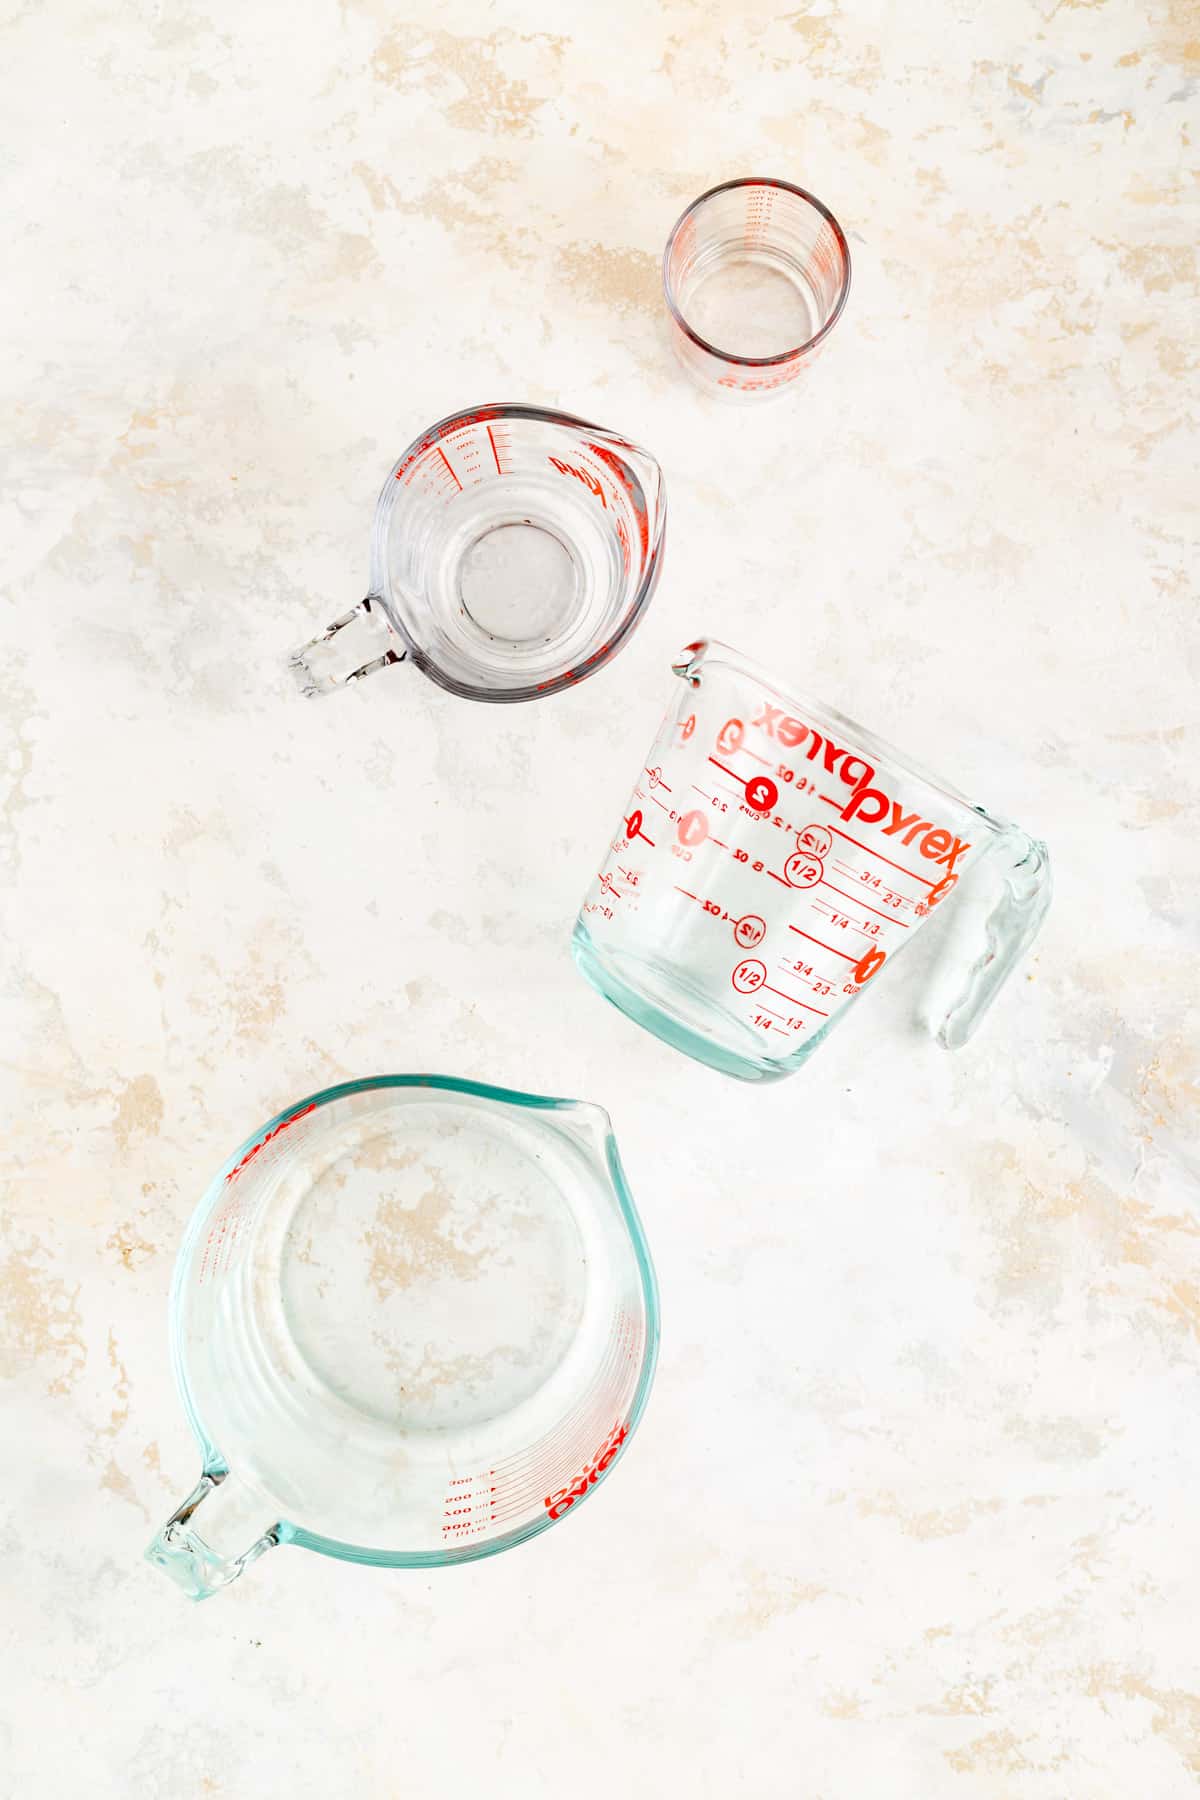 empty glass pyrex pitchers from above with one on its side on white plastic background.